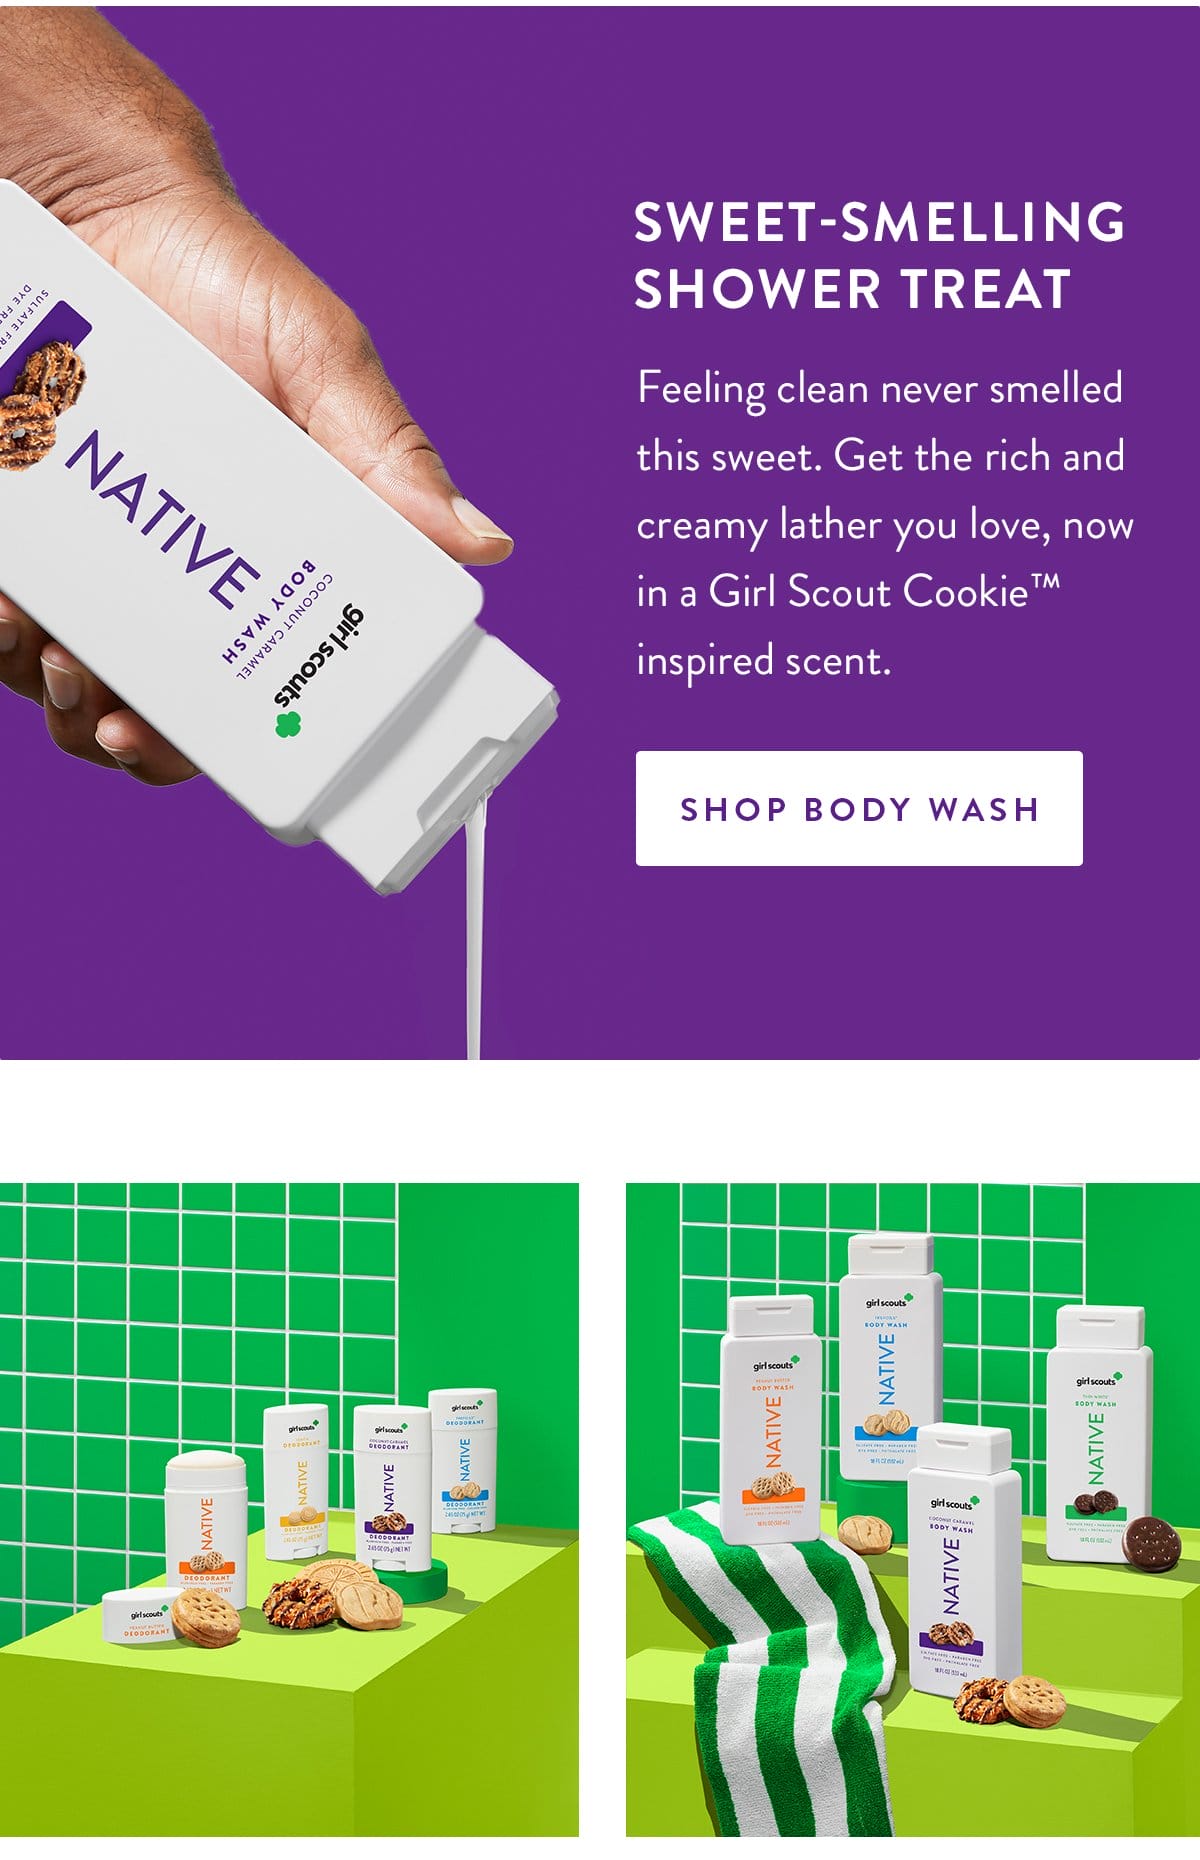 Sweet-Smelling Shower Treat | Feeling clean never smelled this sweet. Get the rich and creamy lather you love, now in a Girl Scout Cookie™ inspired scent. | SHOP BODY WASH